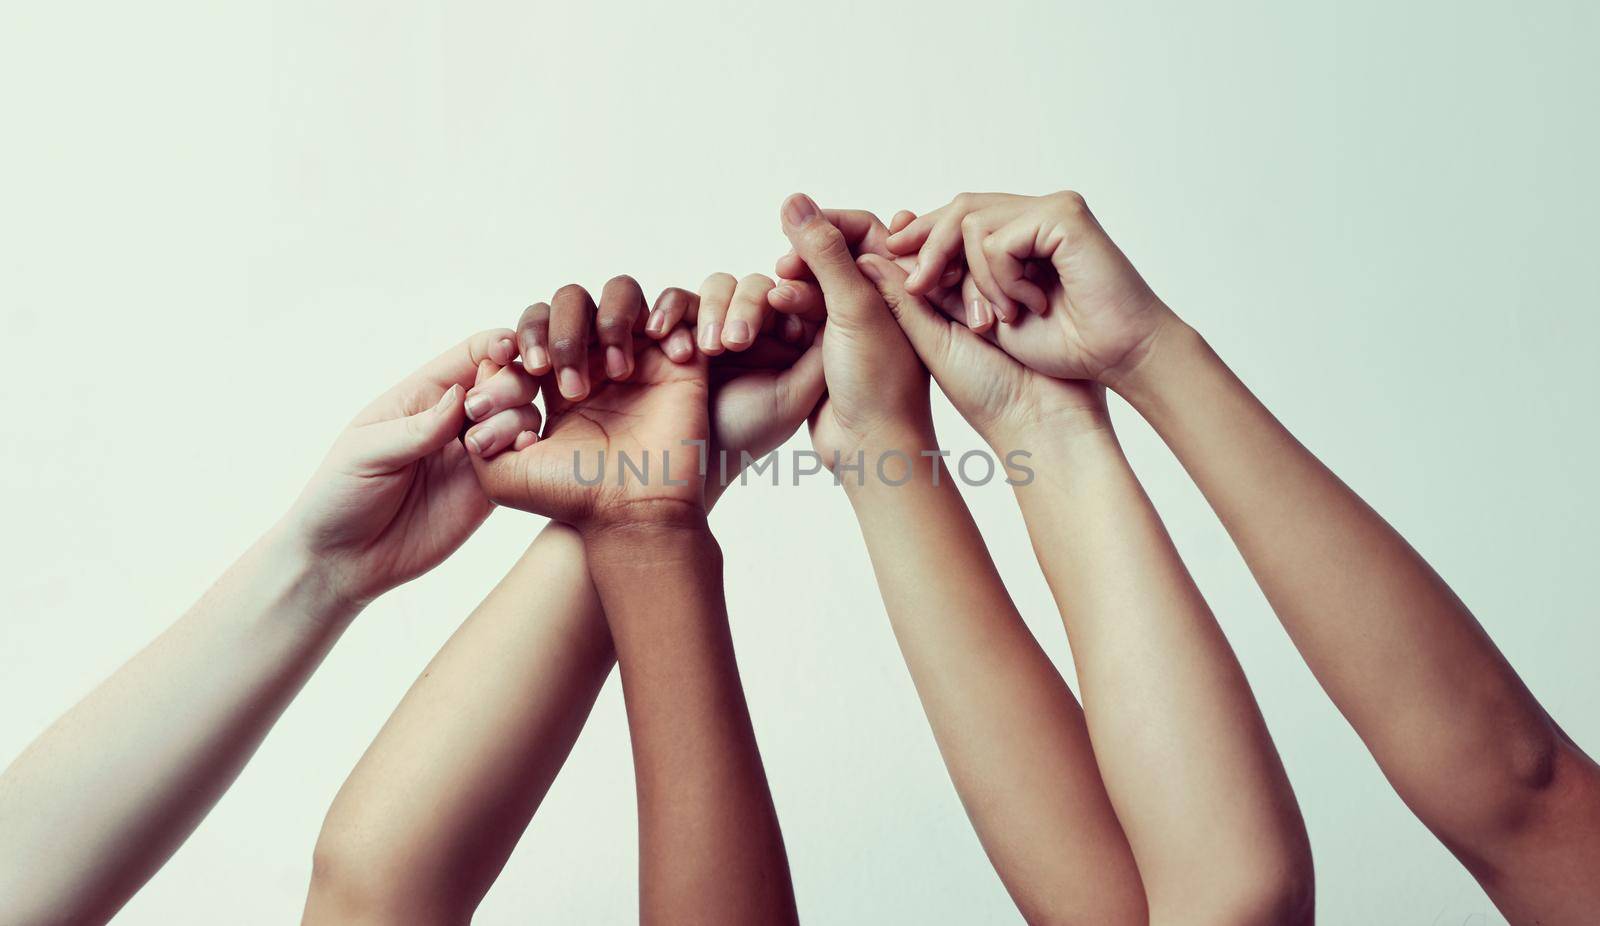 True support. a group of people holding each others thumbs with their hands raised